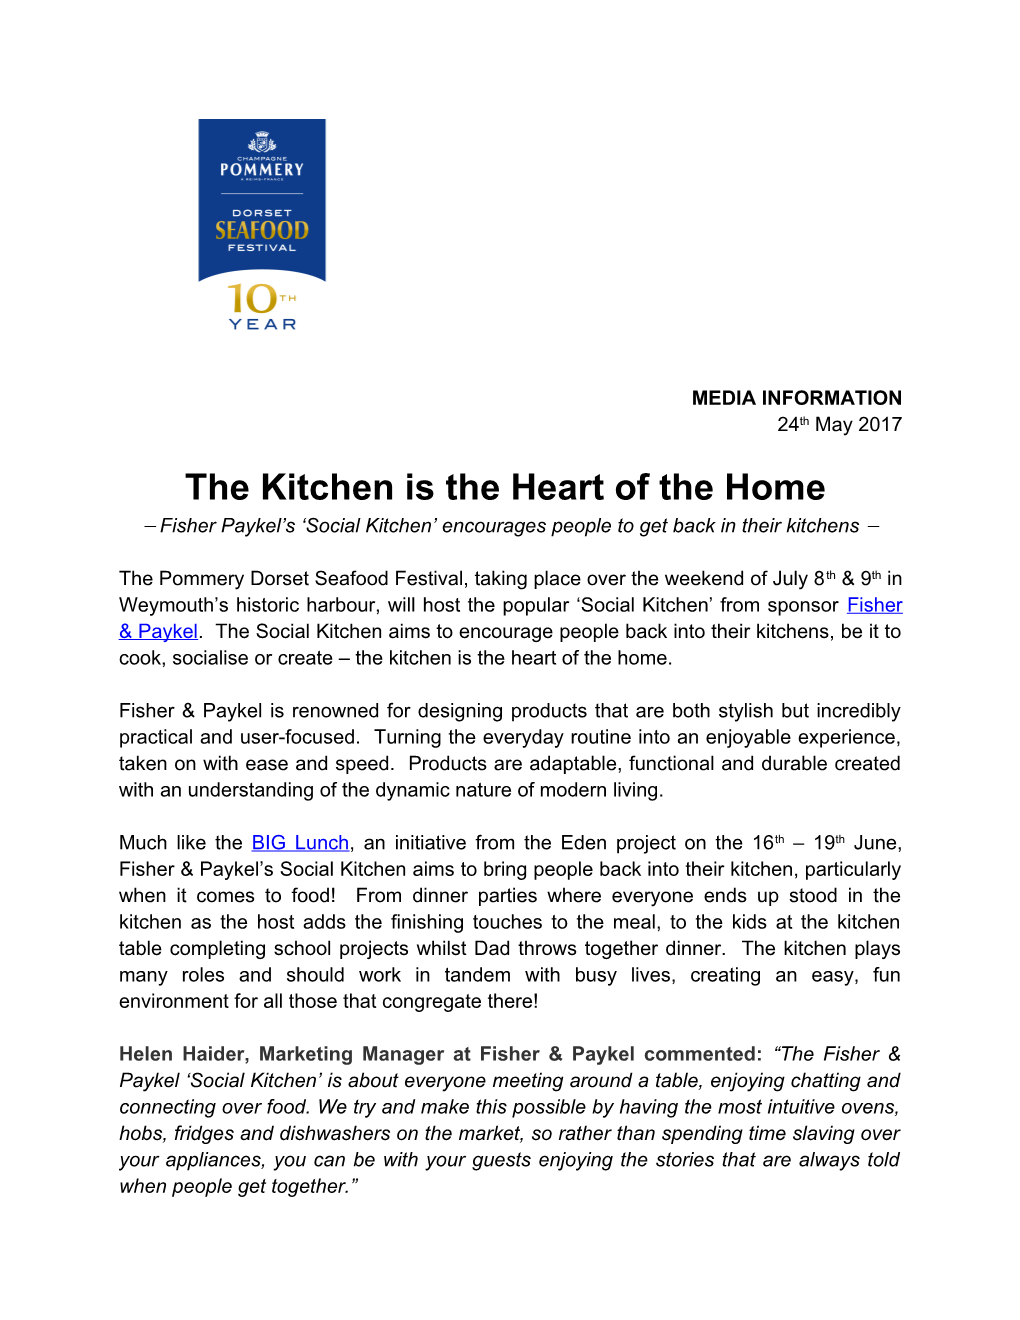 The Kitchen Is the Heart of the Home